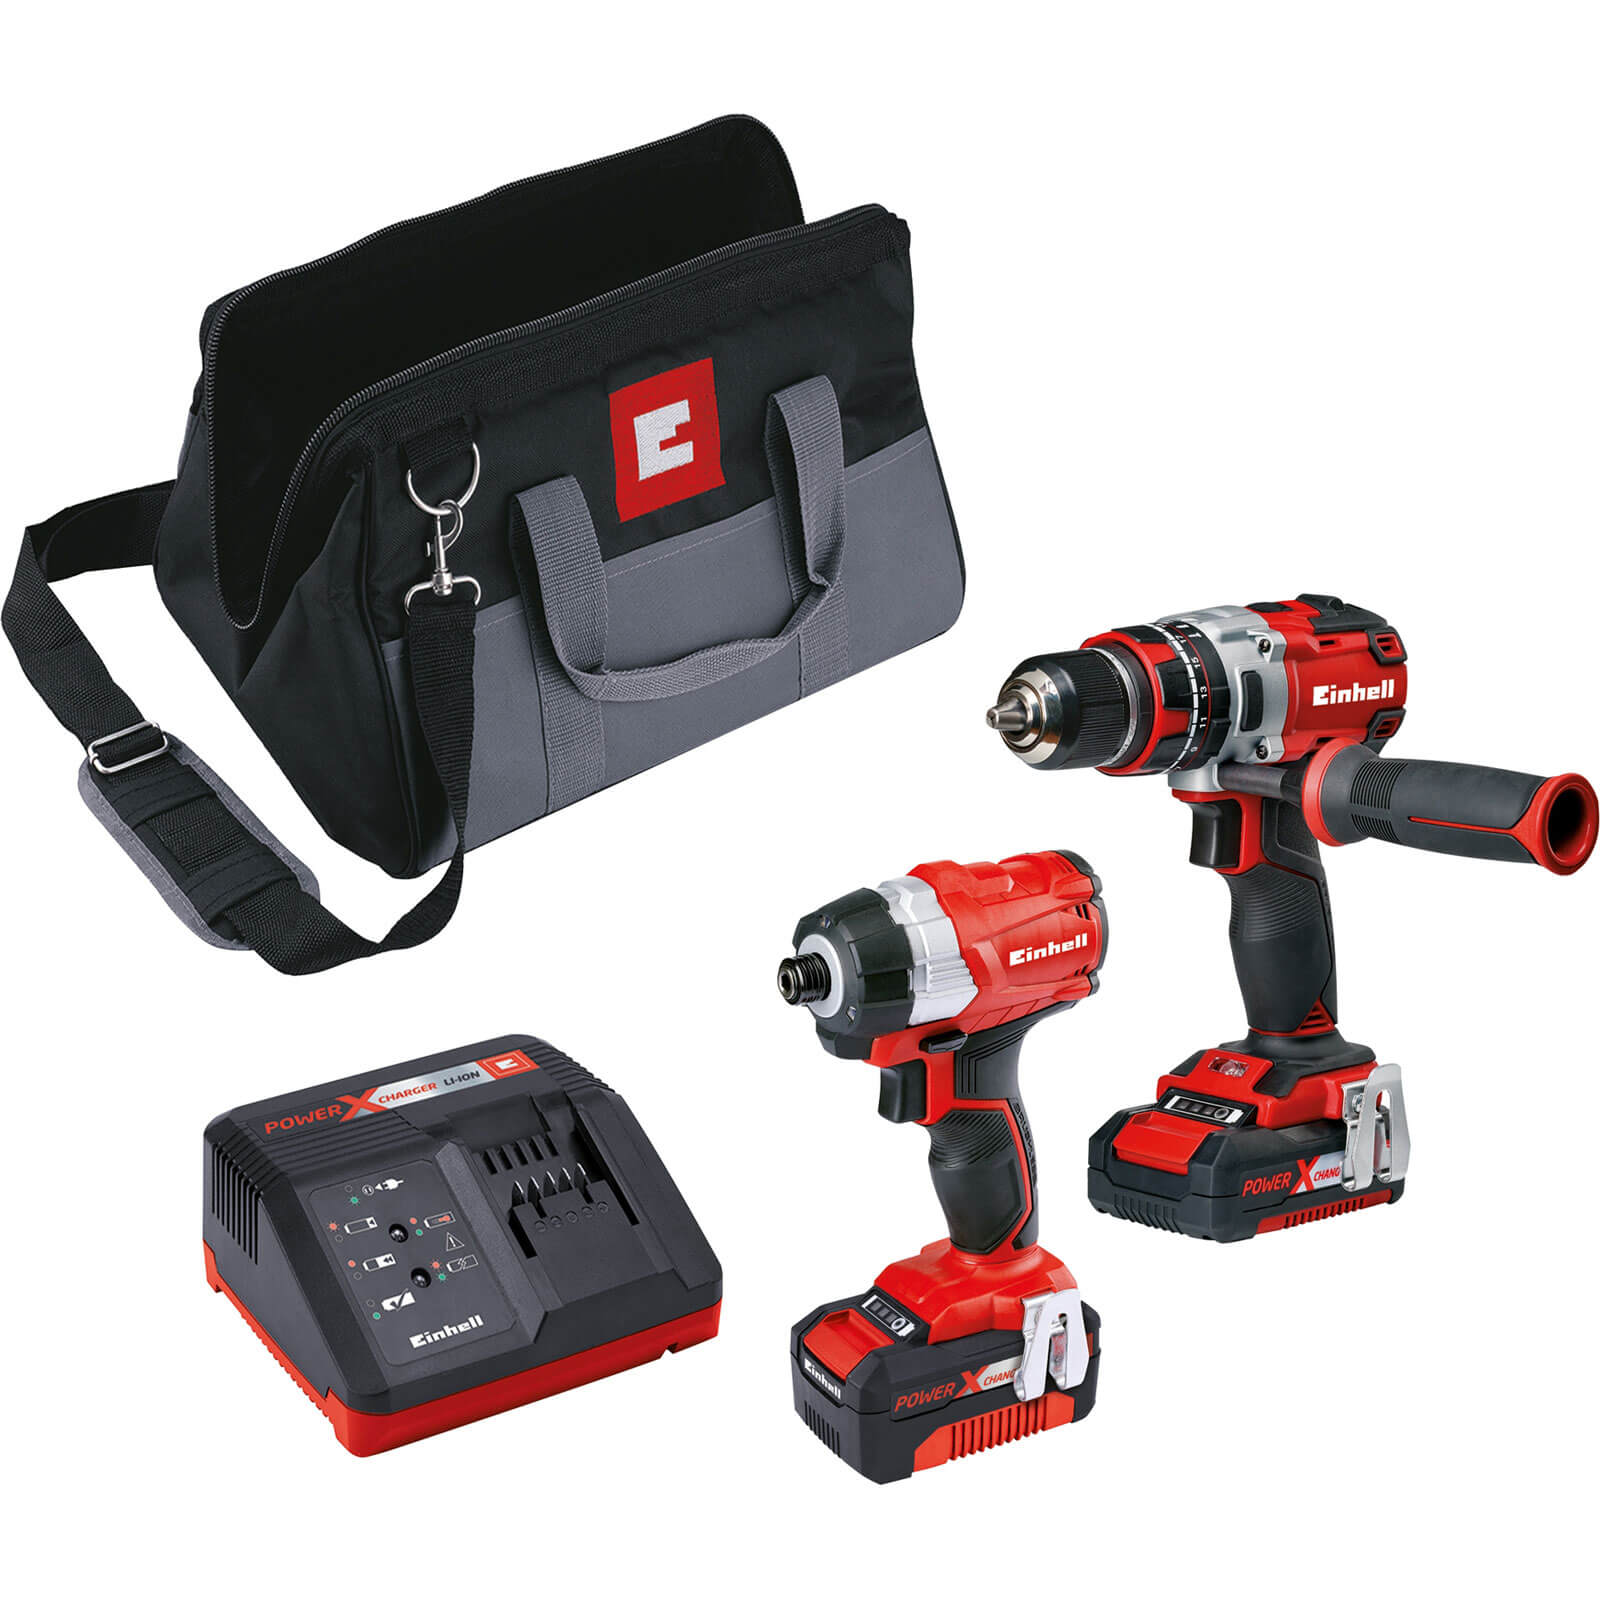 Image of Einhell 18v Cordless Brushless Combi Drill and Impact Driver Kit 1 x 2ah & 1 x4ah Li-ion Charger Bag